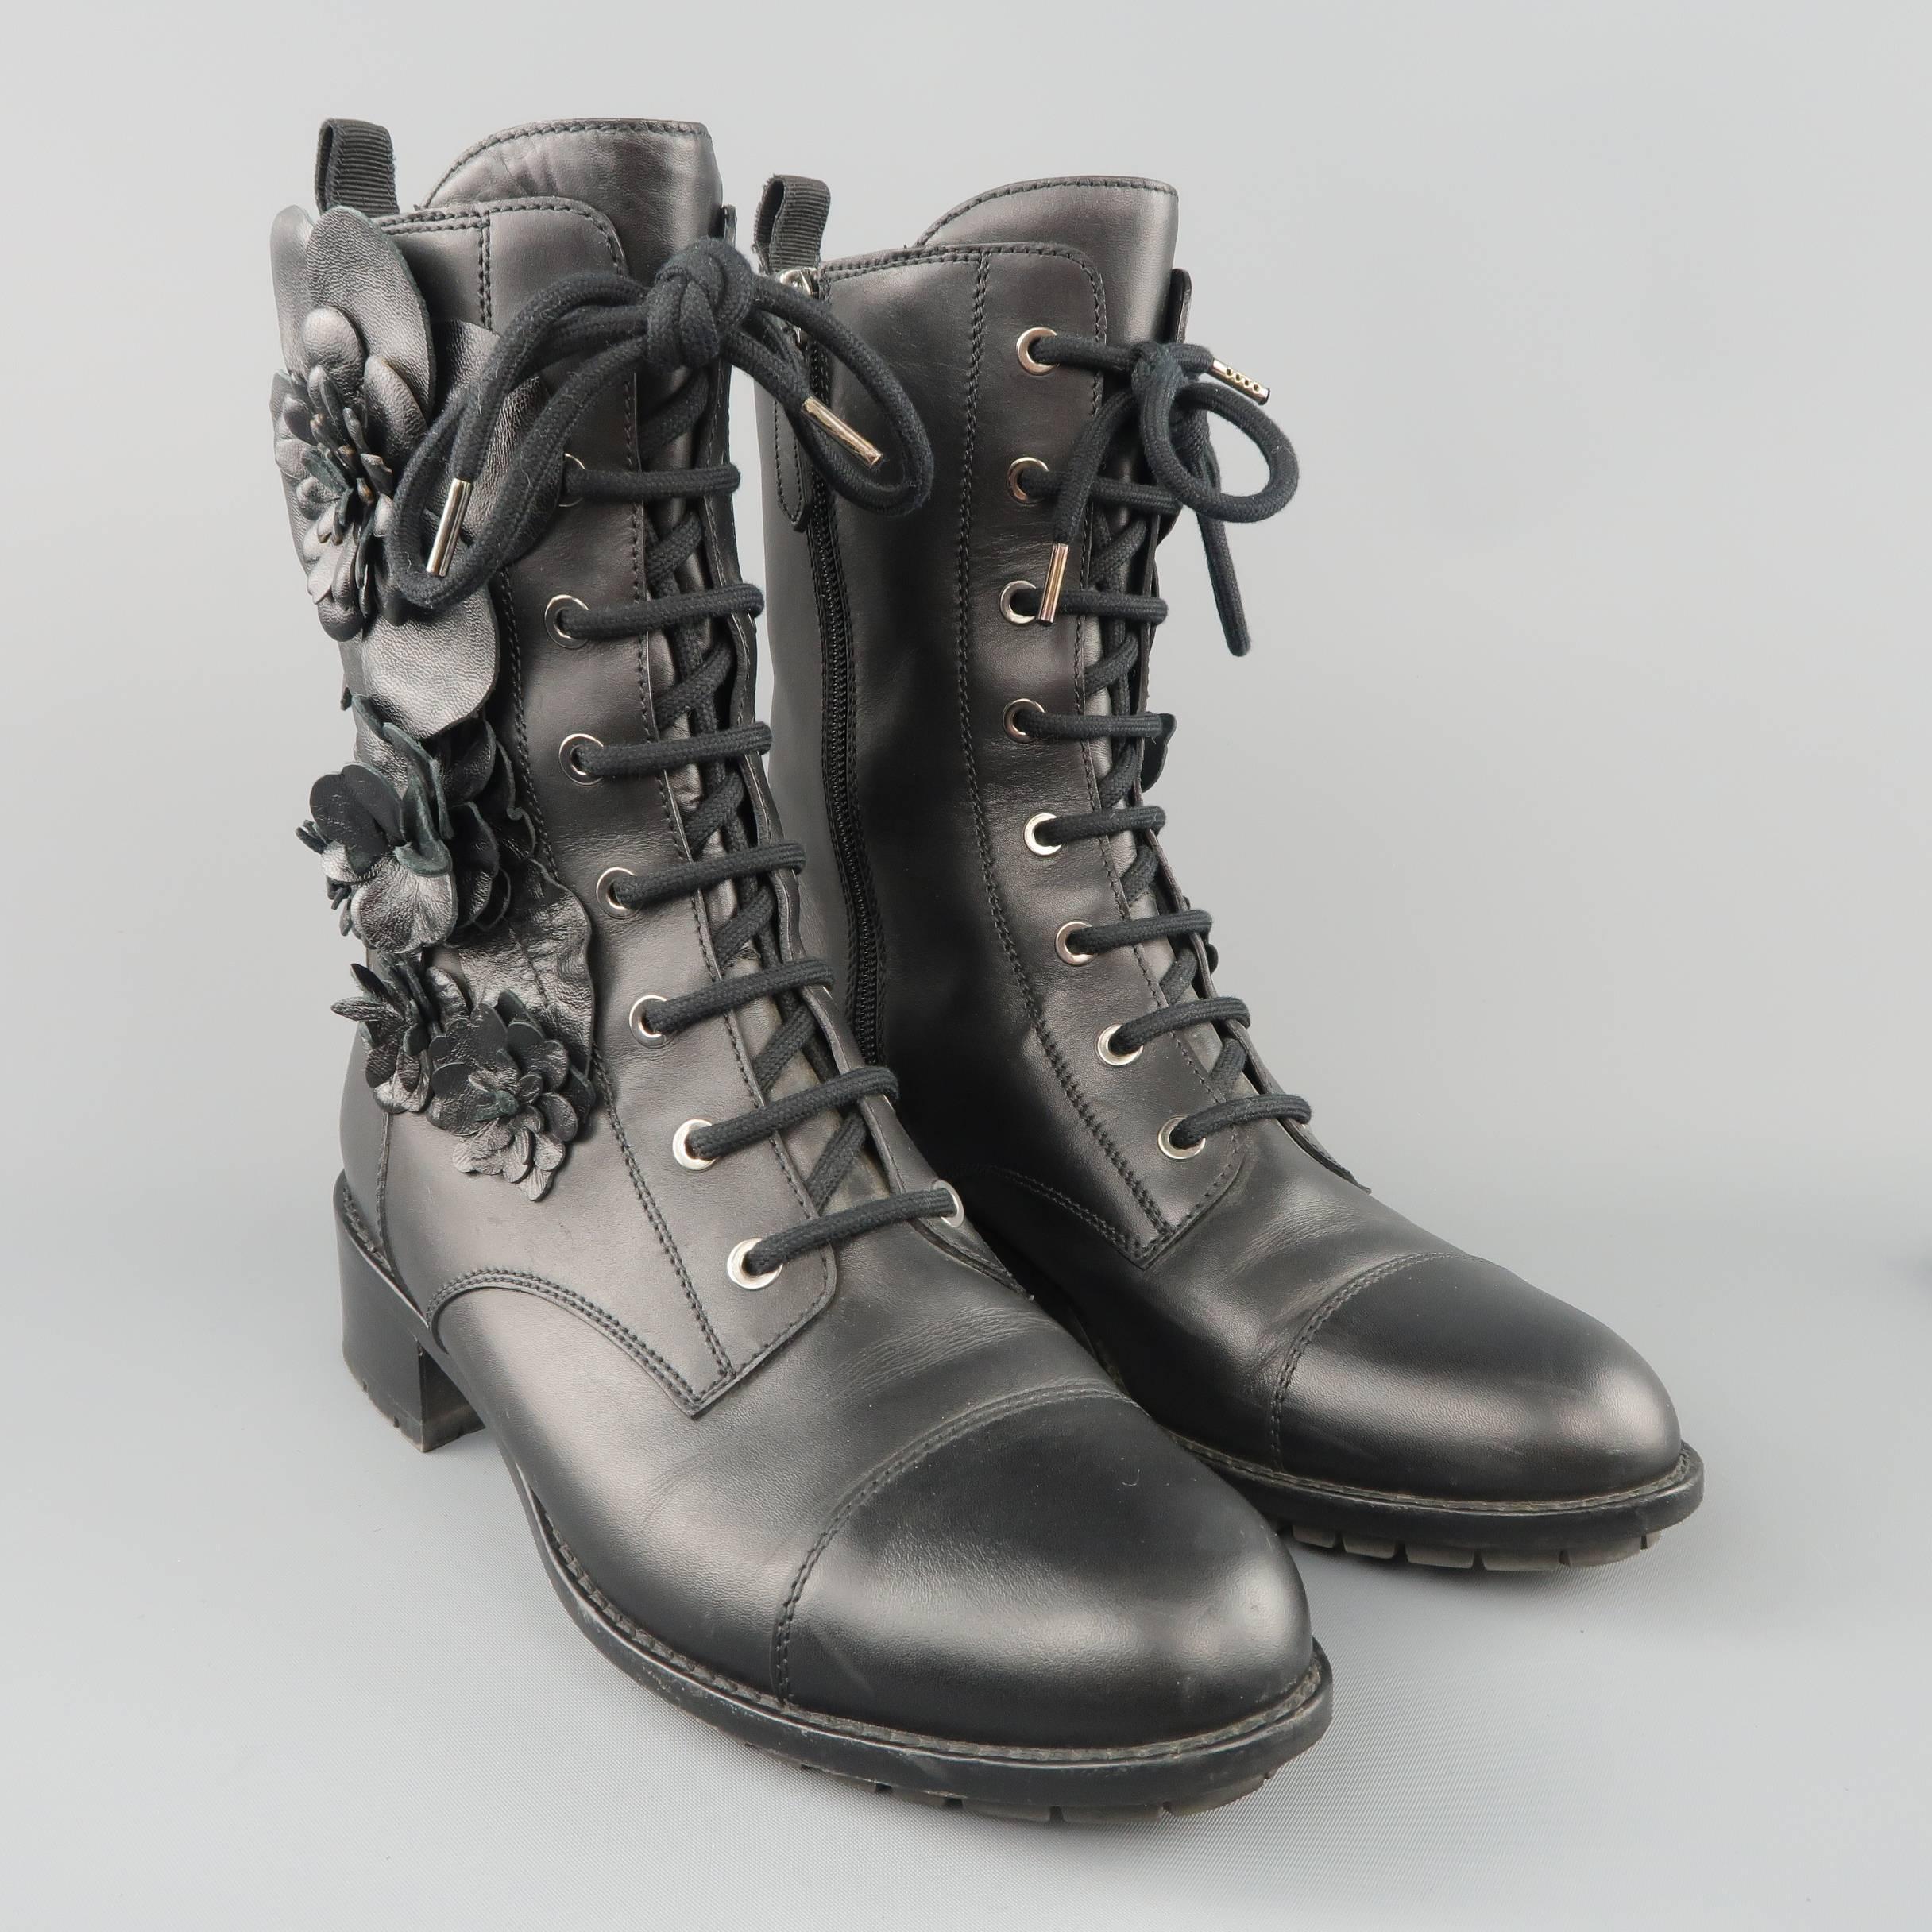 VALENTINO combat style boots come in smooth black leather with a cap toe, lace up grommet front, internal zip closure, heeled sole, and leather floral applique sides. Made in Italy.
 
Good Pre-Owned Condition.
Marked: IT 38.5
 
Measurements:
 
Heel: